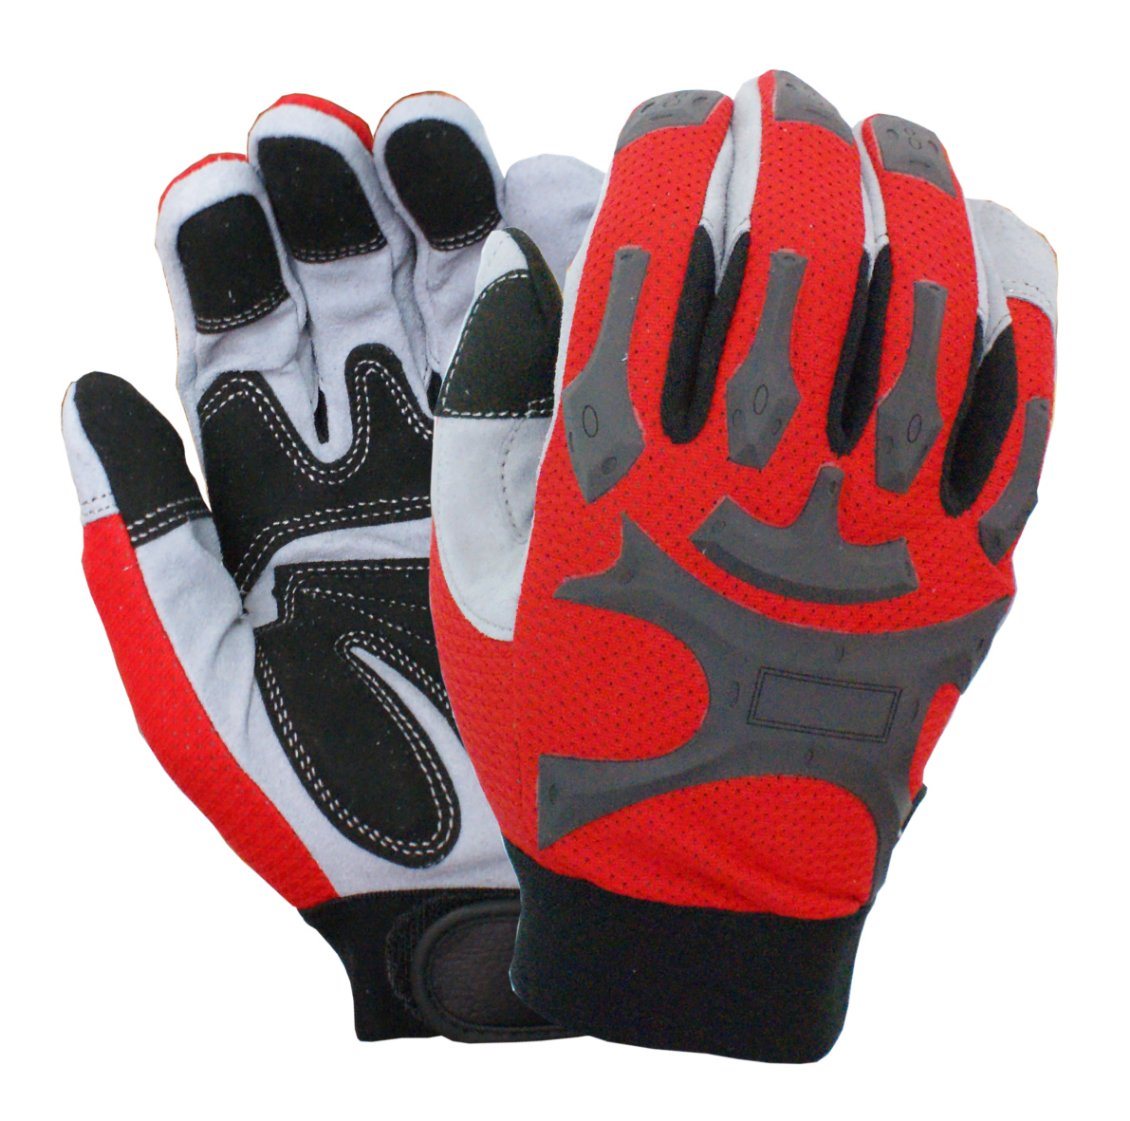 Anti-Vibration Impact Resistant Mechanical Safety Work Gloves with TPR